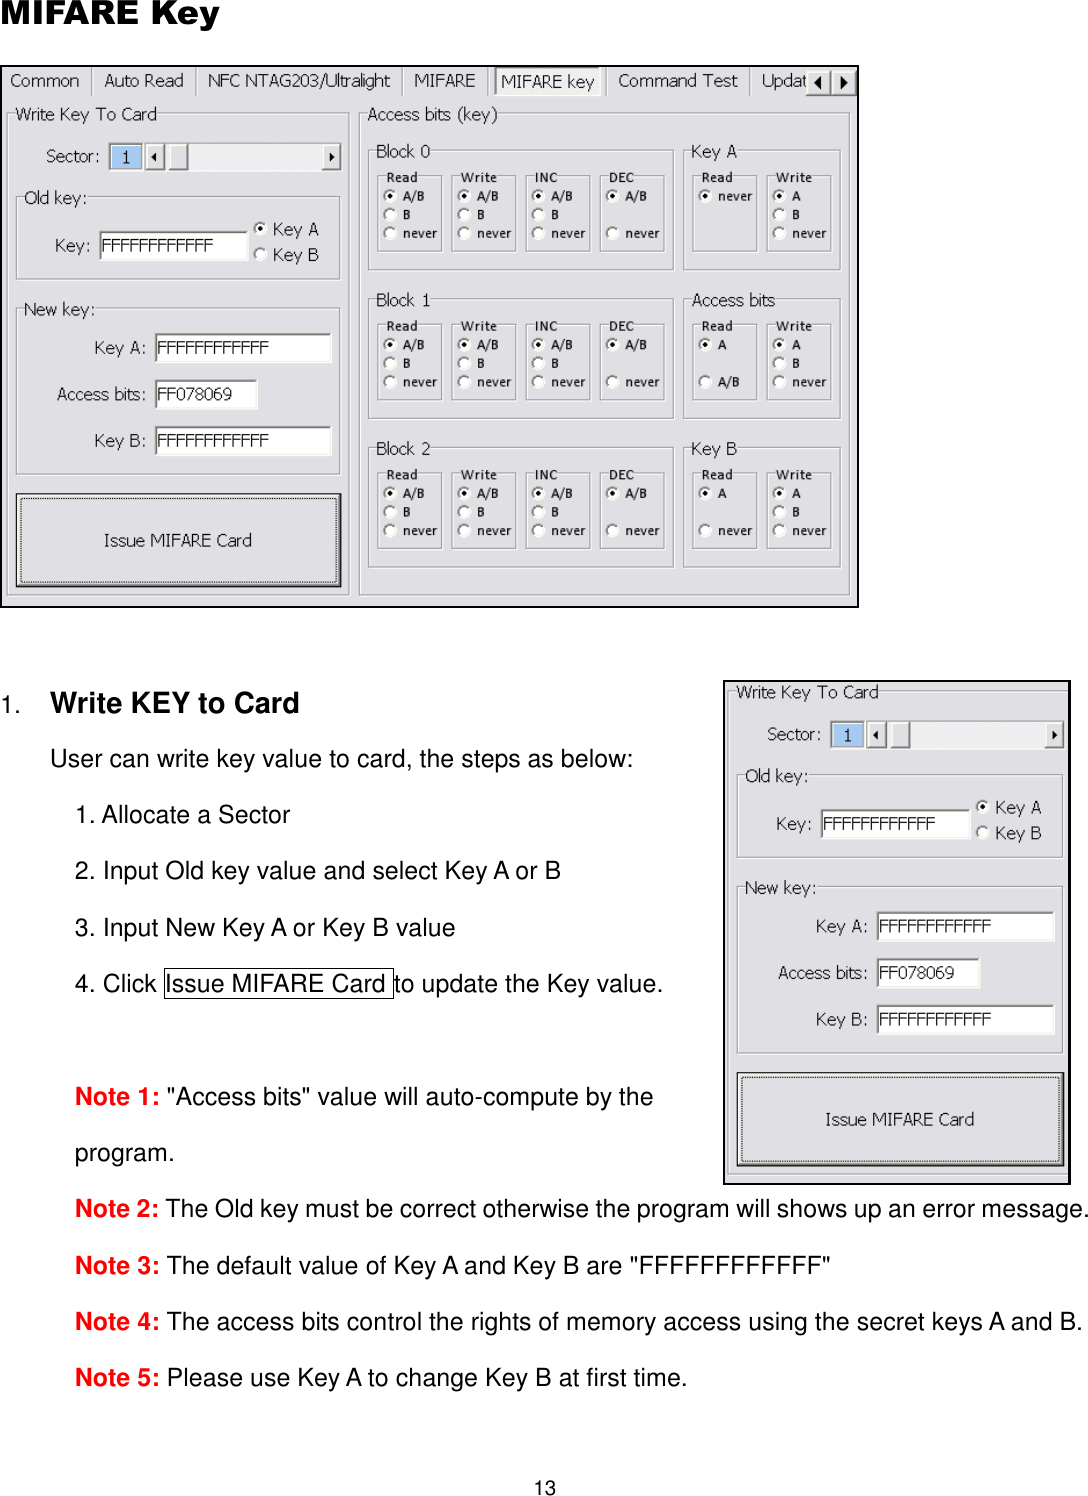 13  MIFARE Key   1. Write KEY to Card User can write key value to card, the steps as below:   1. Allocate a Sector 2. Input Old key value and select Key A or B 3. Input New Key A or Key B value 4. Click Issue MIFARE Card to update the Key value.    Note 1: &quot;Access bits&quot; value will auto-compute by the program. Note 2: The Old key must be correct otherwise the program will shows up an error message. Note 3: The default value of Key A and Key B are &quot;FFFFFFFFFFFF&quot; Note 4: The access bits control the rights of memory access using the secret keys A and B. Note 5: Please use Key A to change Key B at first time.  